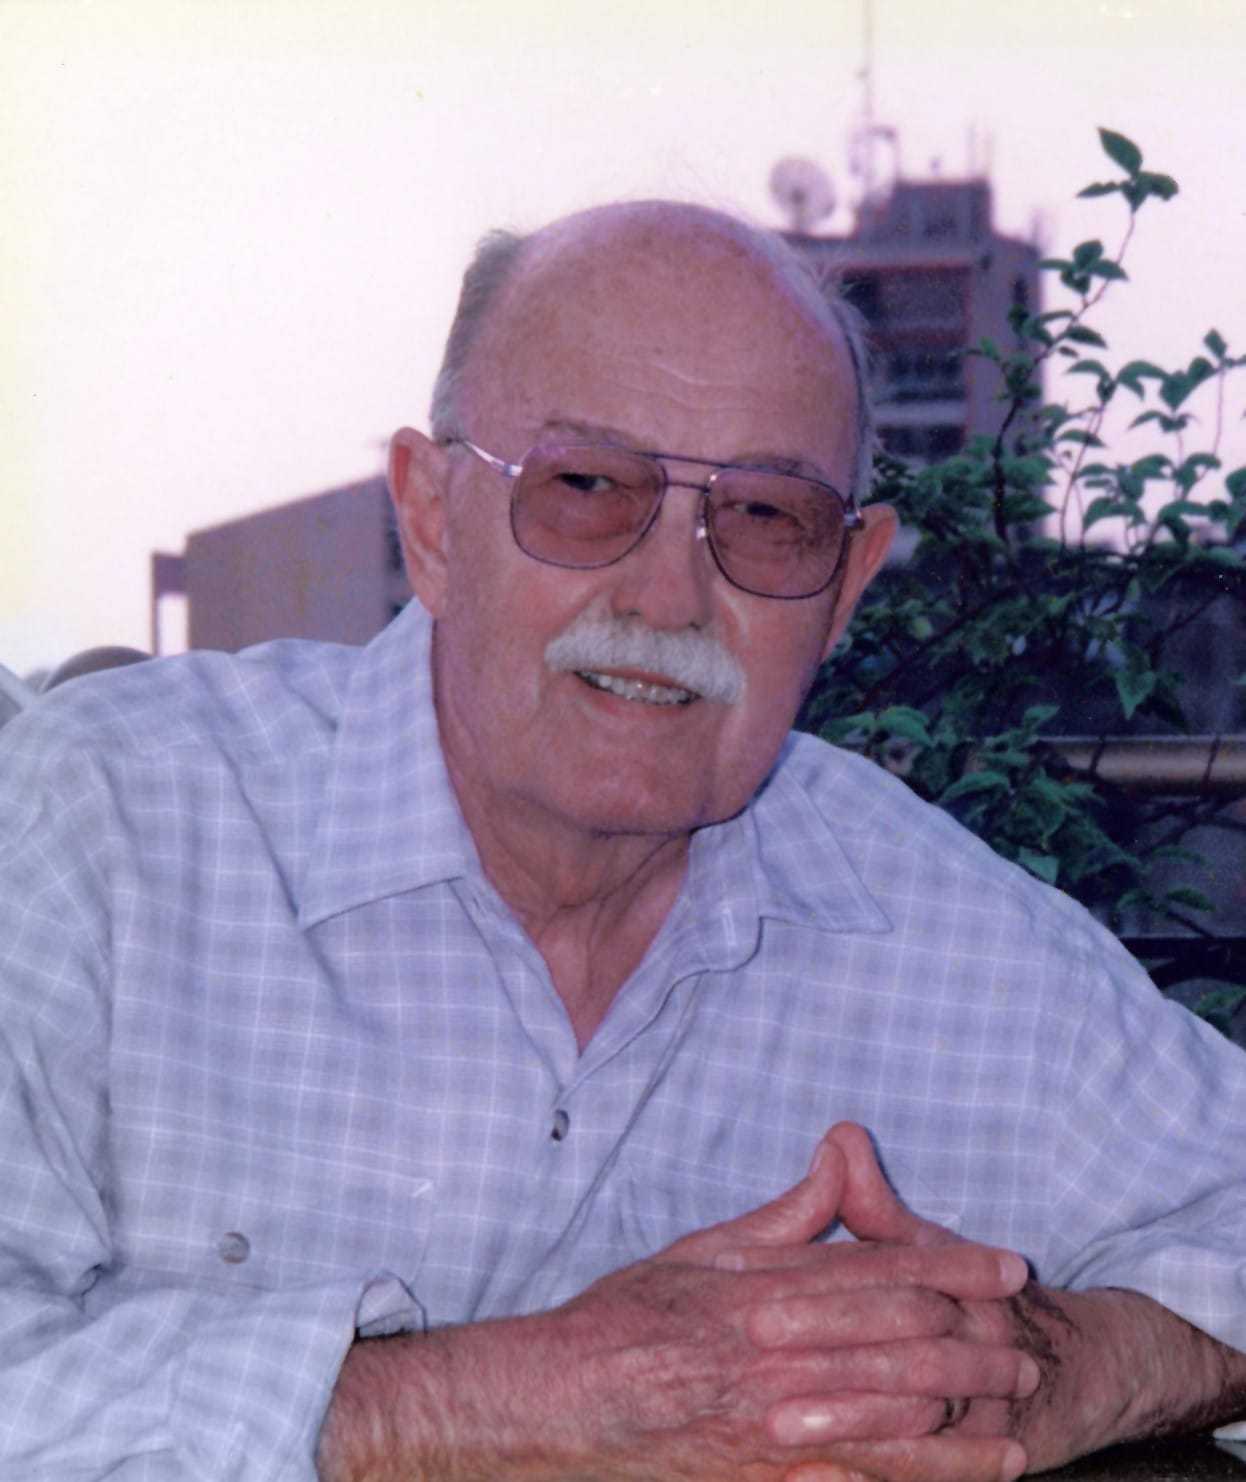 A color portrait photograph of an older and balding LaGueux with a thick white mustache, a checkered dress shirt unbuttoned at the top, and large stylish sunglasses.